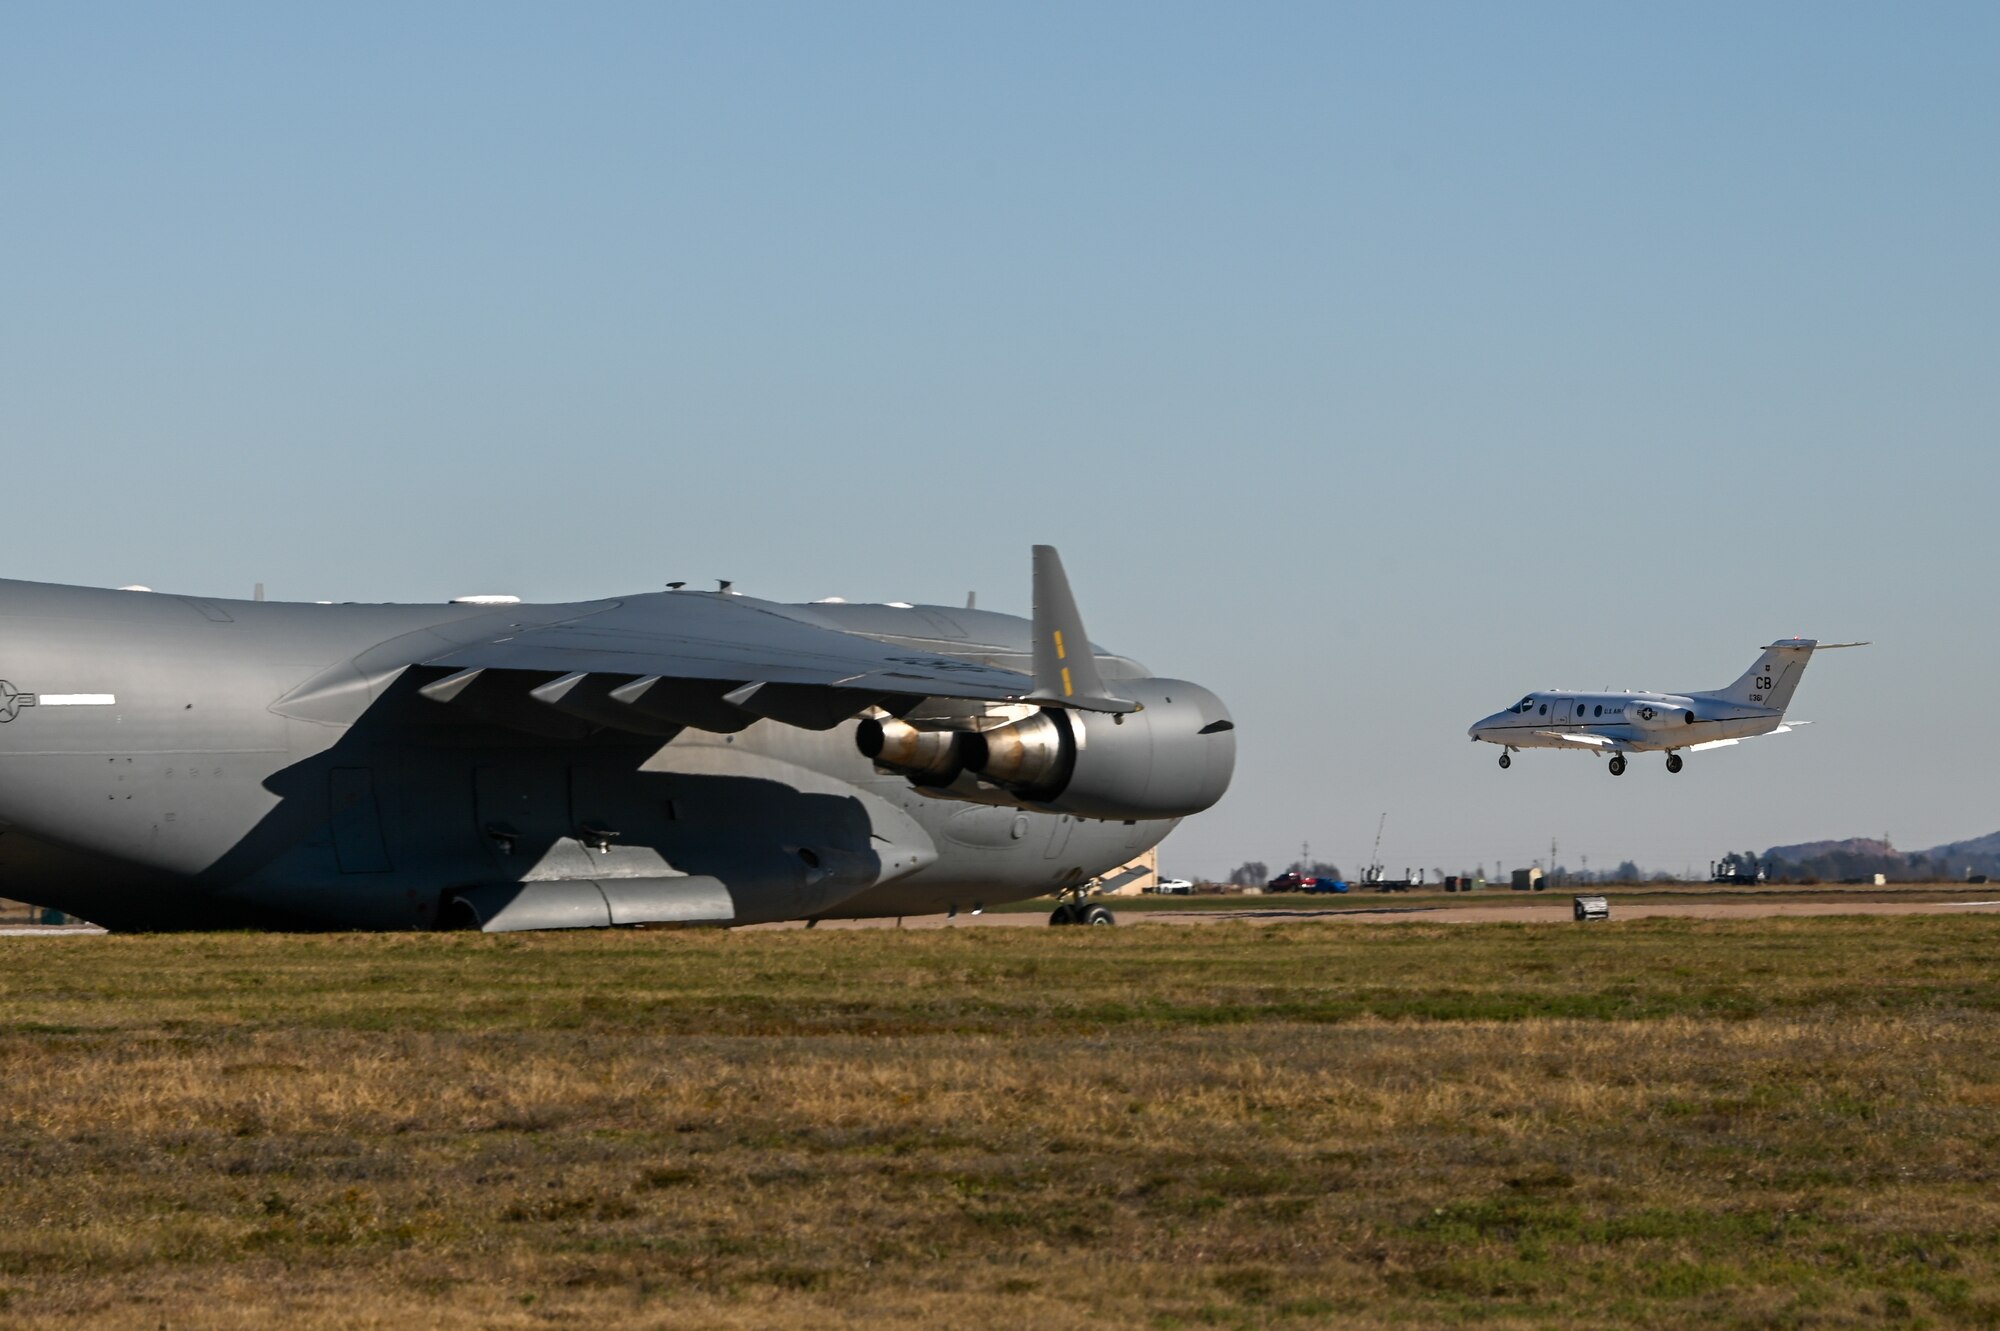 A T-1 Jayhawk lands at Altus Air Force Base, Oklahoma, while a C-17 Globemaster III waits to taxi, Nov. 15, 2022. The T-1 is a medium-range, twin-engine jet trainer used in the advanced phase of specialized undergraduate pilot training for students selected to fly airlift or tanker aircraft. (U.S. Air Force photo by Senior Airman Kayla Christenson)